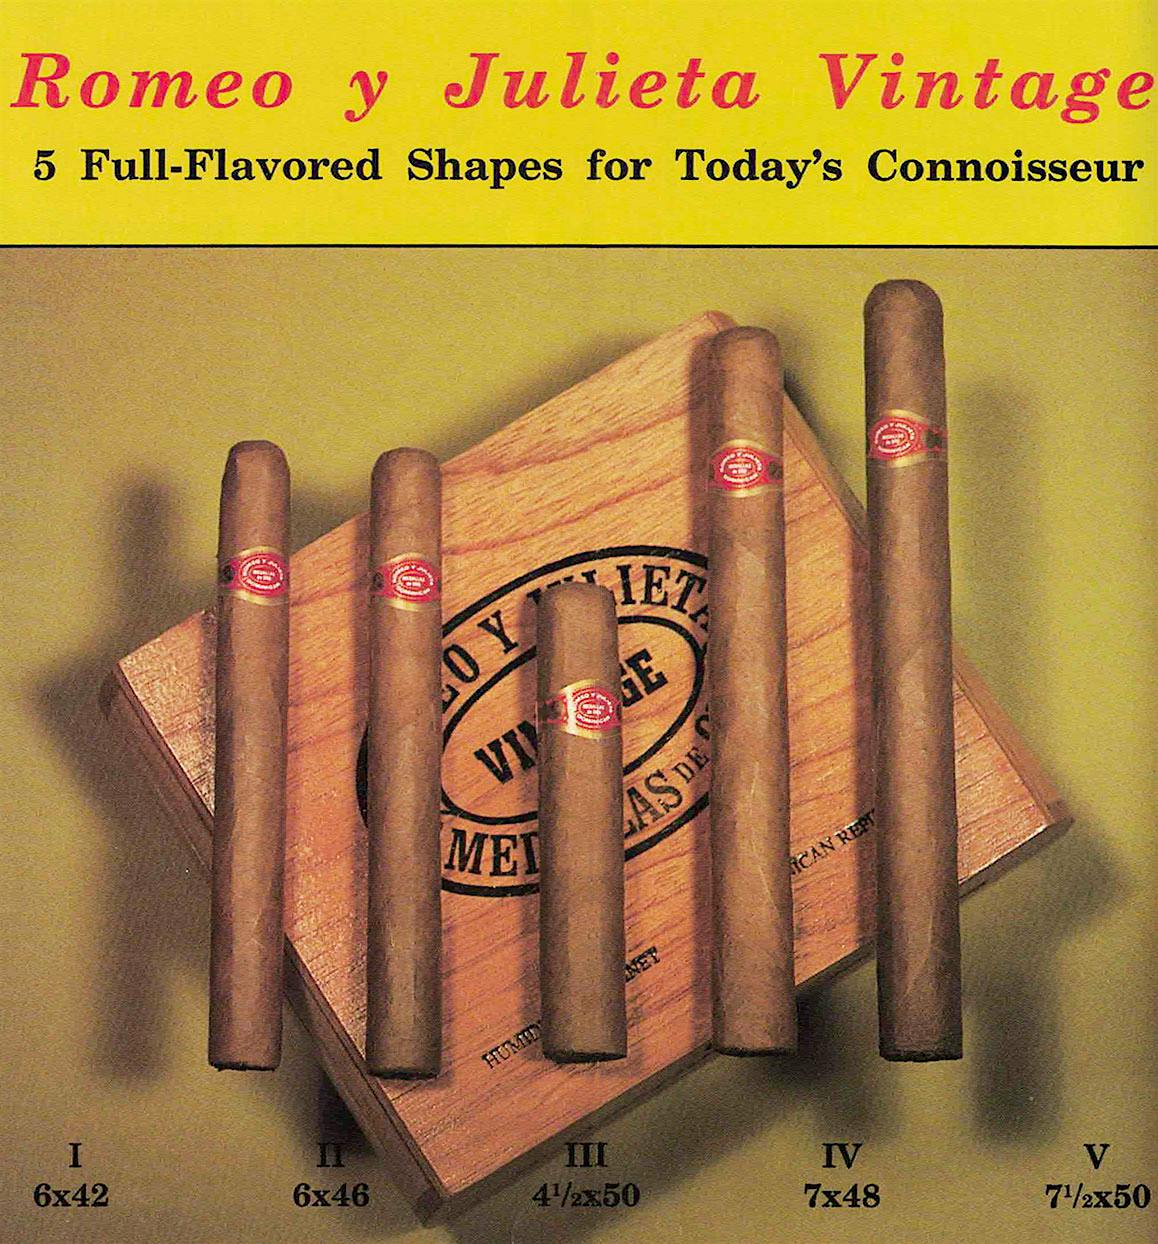 A photo from an old brochure promoting the Romeo y Julieta Vintage line. It was made by Manuel Quesada for Hollco Rohr in the 1990s.